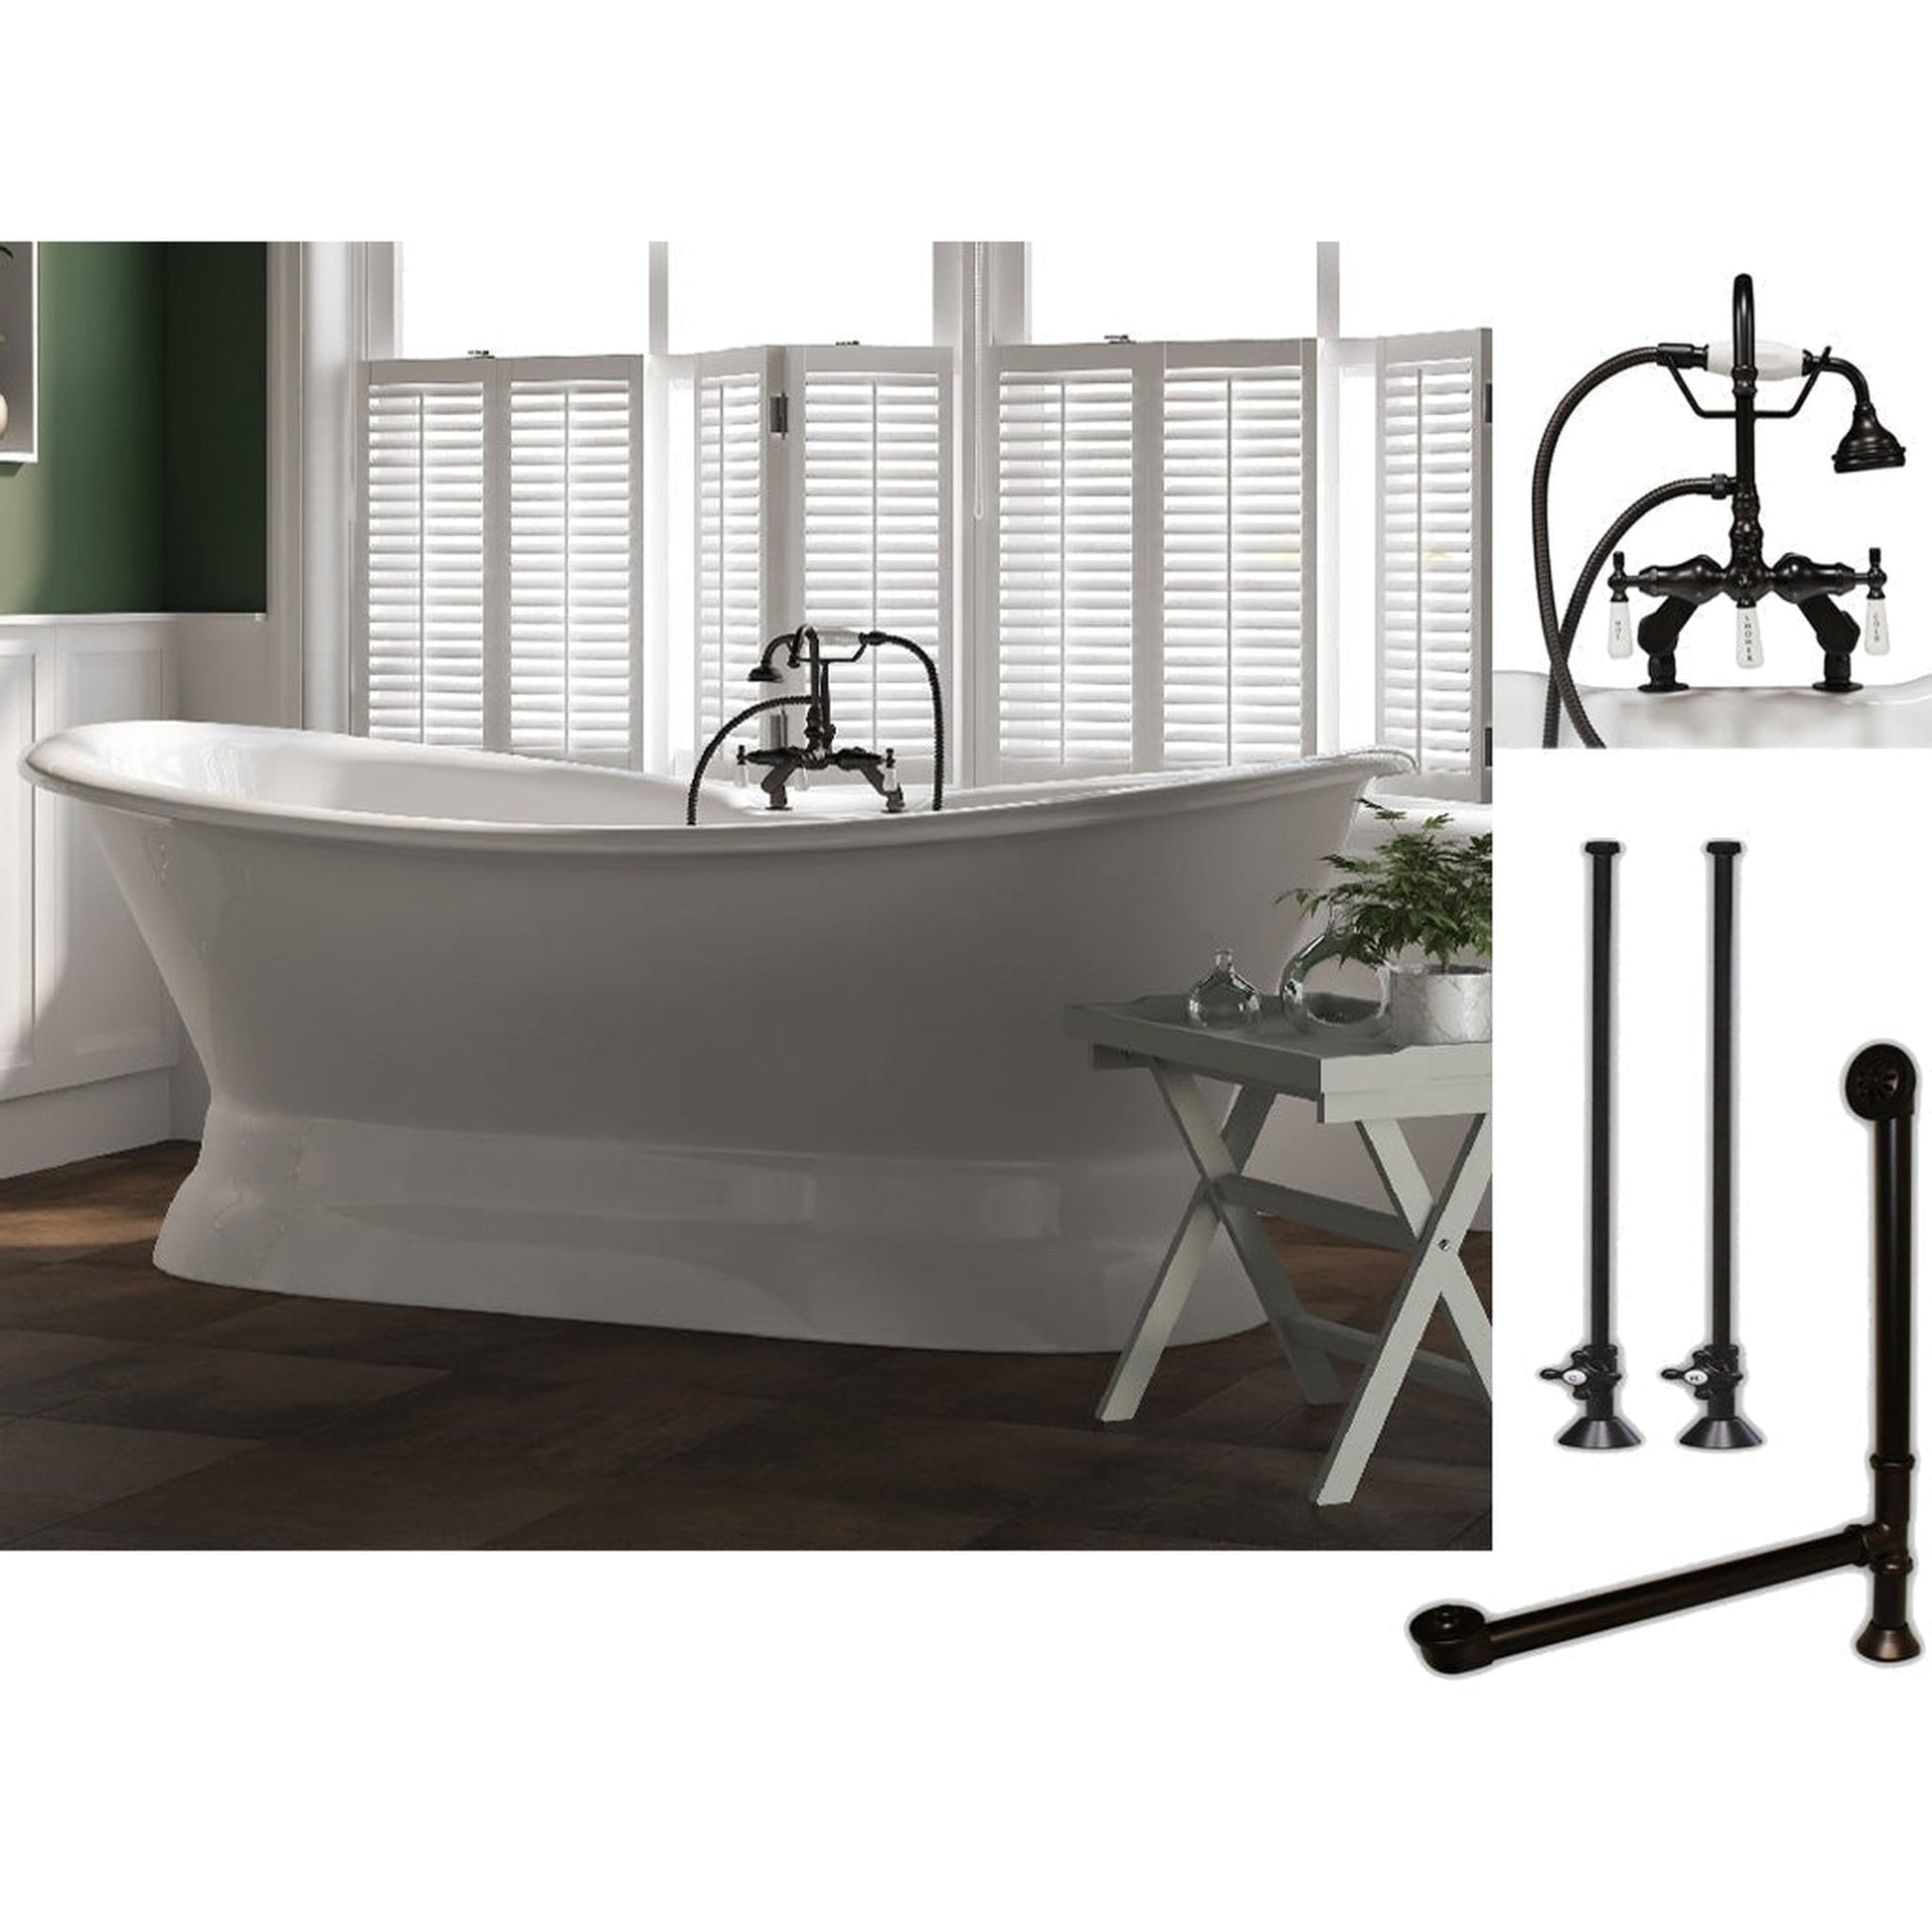 Cambridge Plumbing 71" White Cast Iron Double Slipper Pedestal Bathtub With Deck Holes And Complete Plumbing Package Including Porcelain Lever English Telephone Brass Faucet, Supply Lines, Drain And Overflow Assembly In Oil Rubbed Bronze